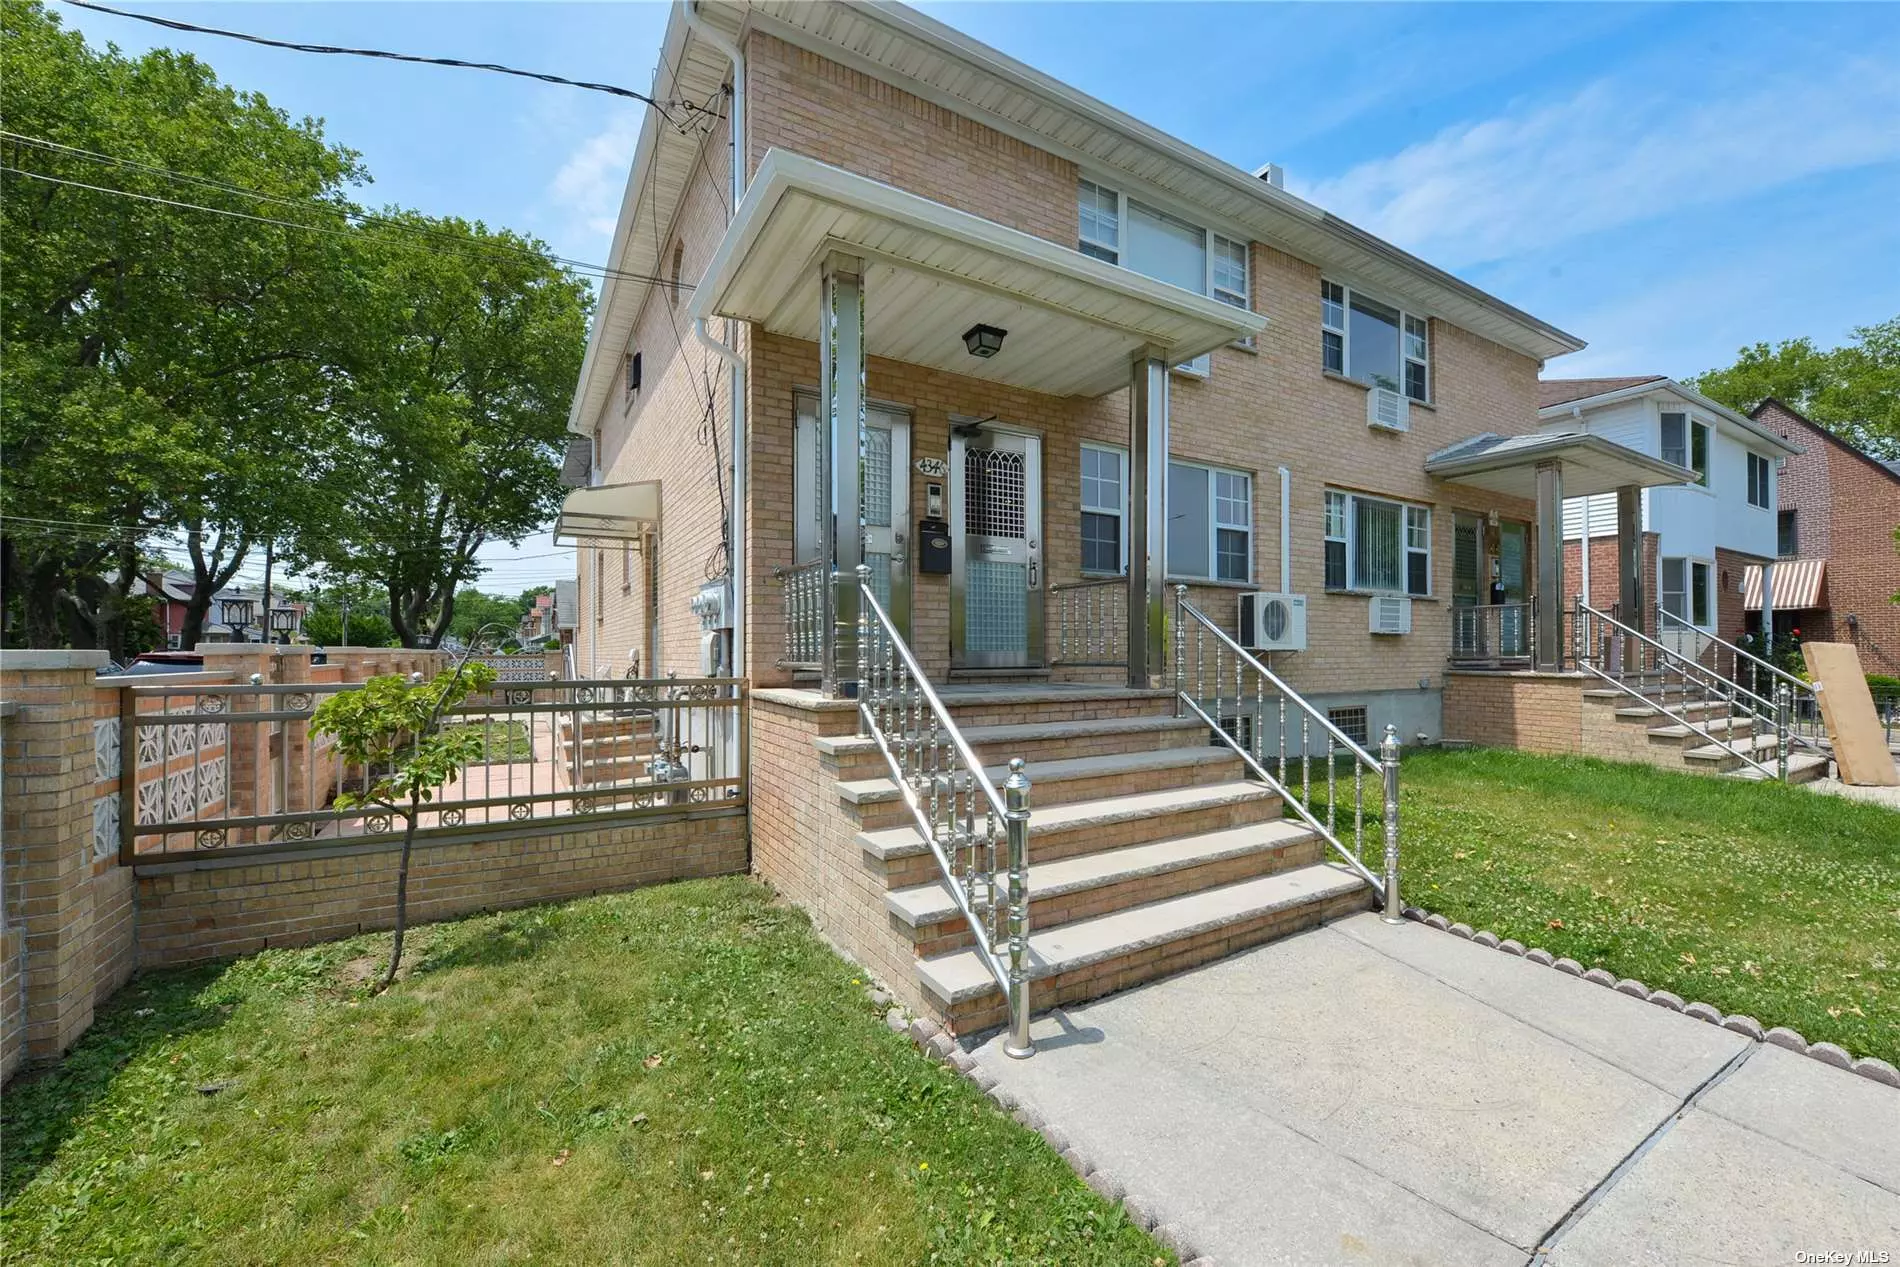 Just arrived- young S/D fully brick 2 family house in prime Auburndale, Flushing neighborhood. This 5 bedroom, 5 full bath home has been well maintained by long time family. Turn key and move in condition. New roof, HW heater, 2 separate boilers, 4 zone heating. Close to buses along Northern Blvd, Auburndale LIRR, shopping, etc.